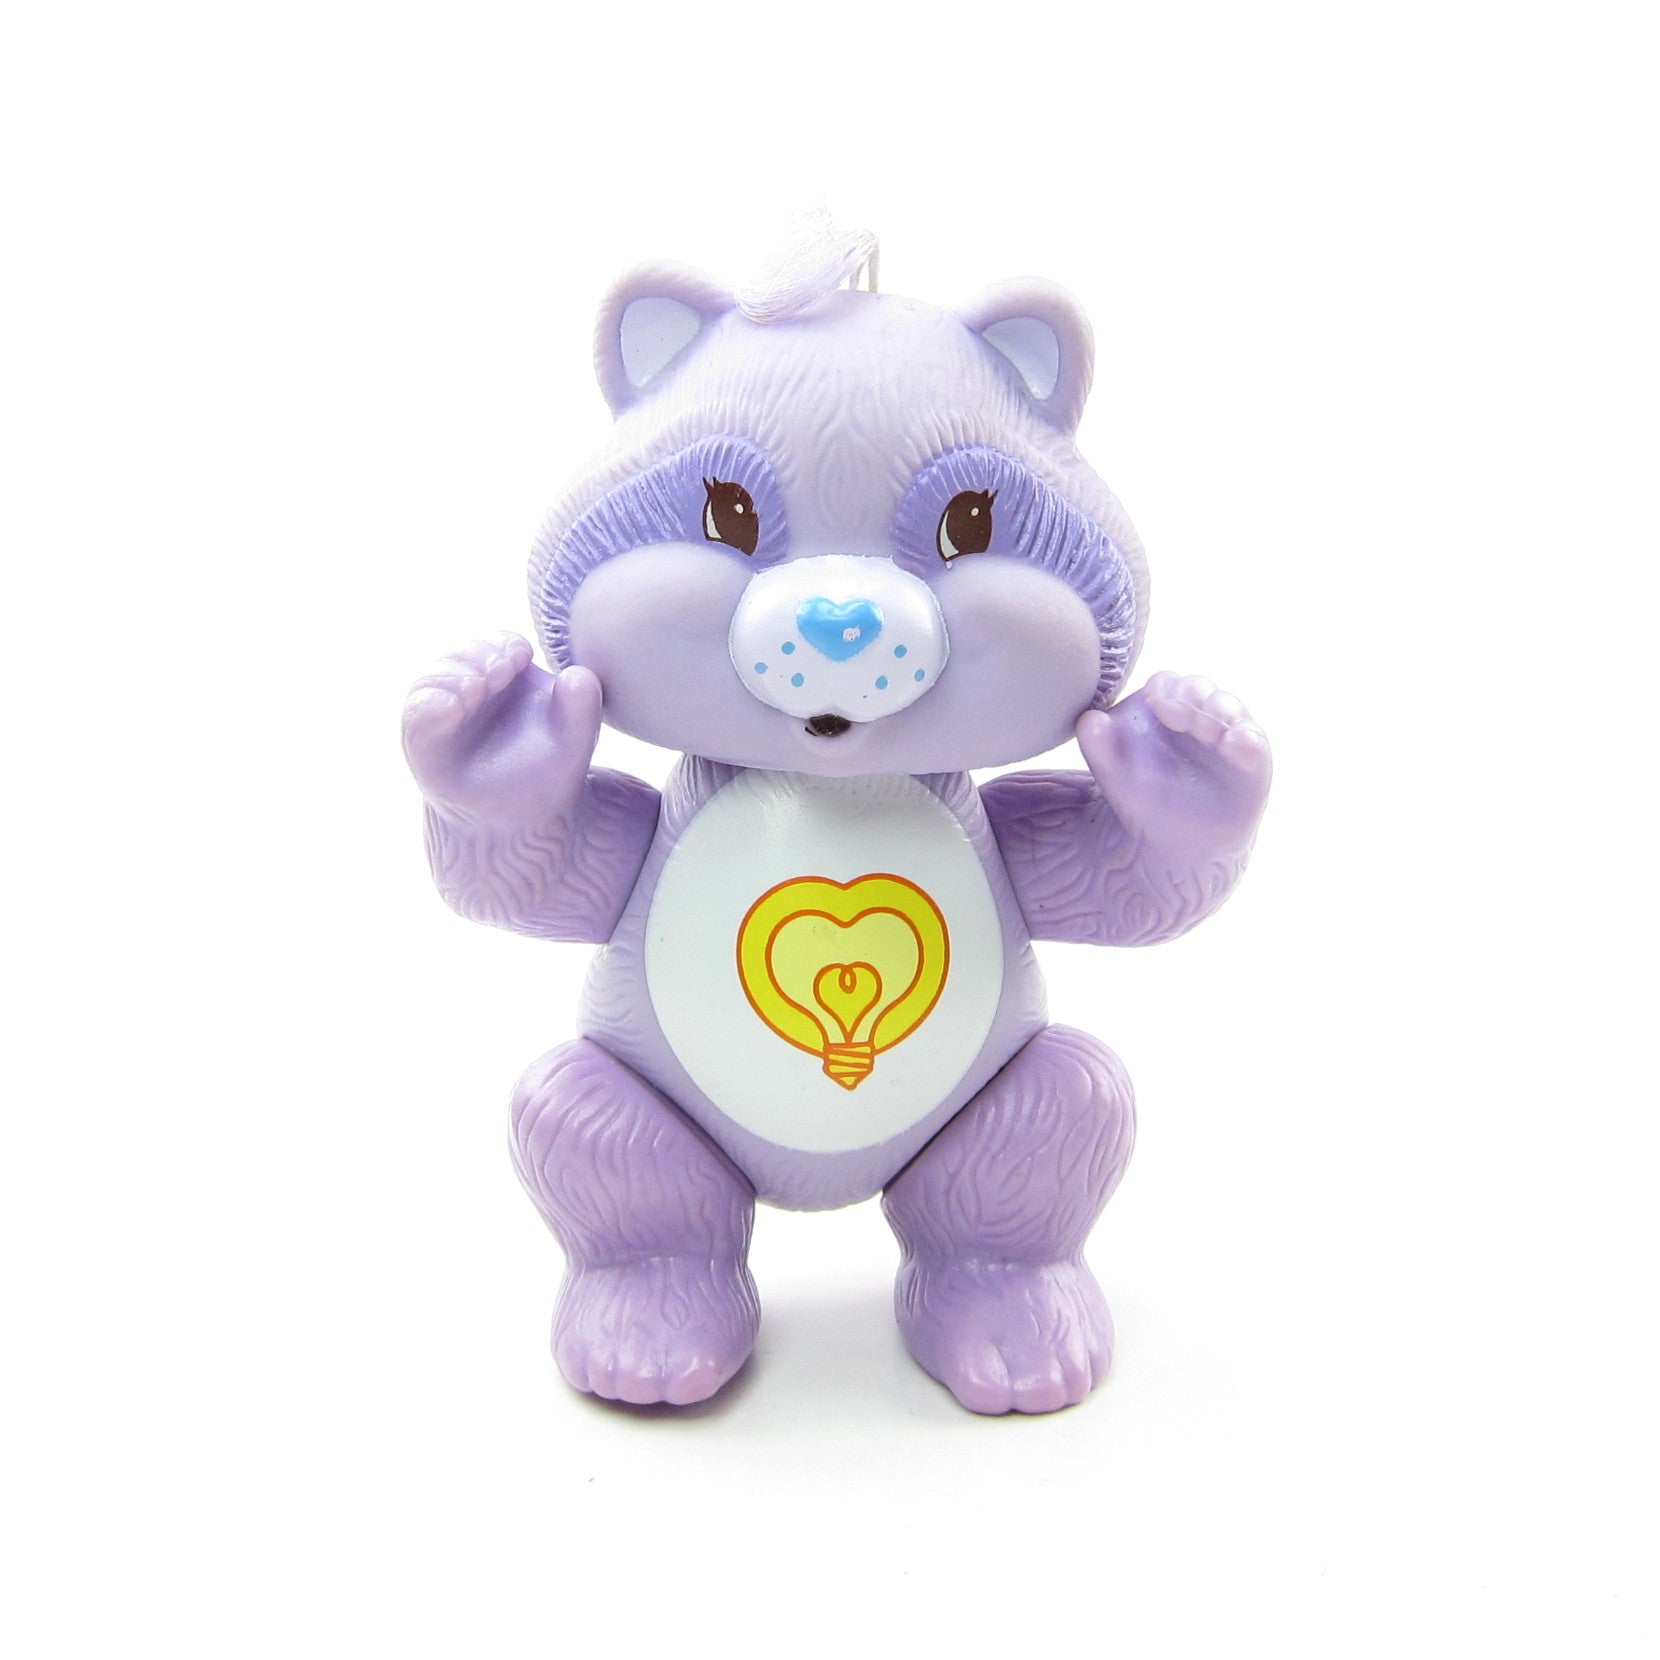 Care Bears Cousins Bright Heart Racoon poseable figure